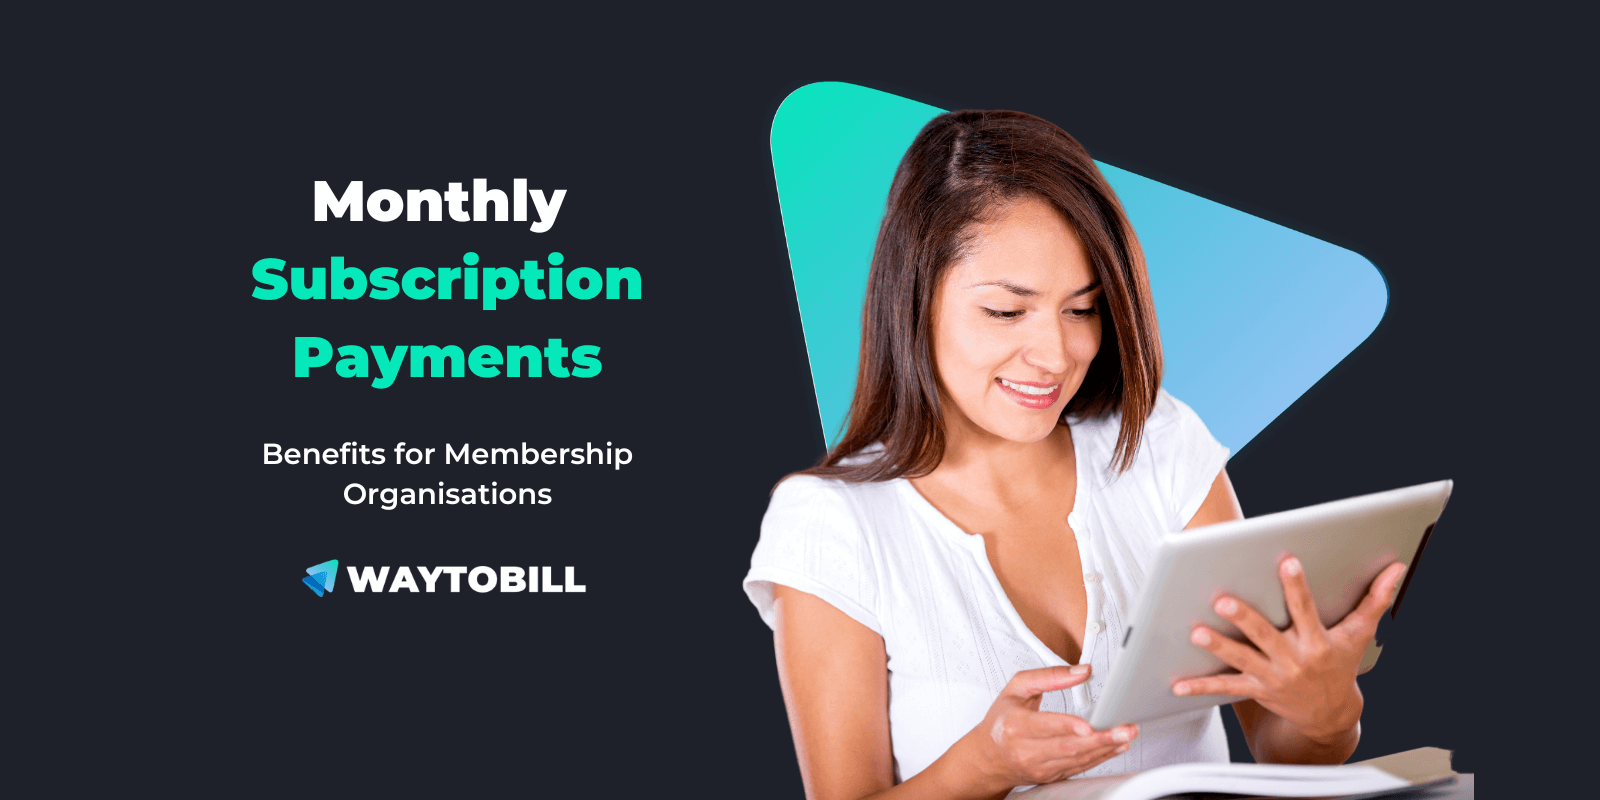 Benefits of Monthly Subscription Payments for Membership Organisations